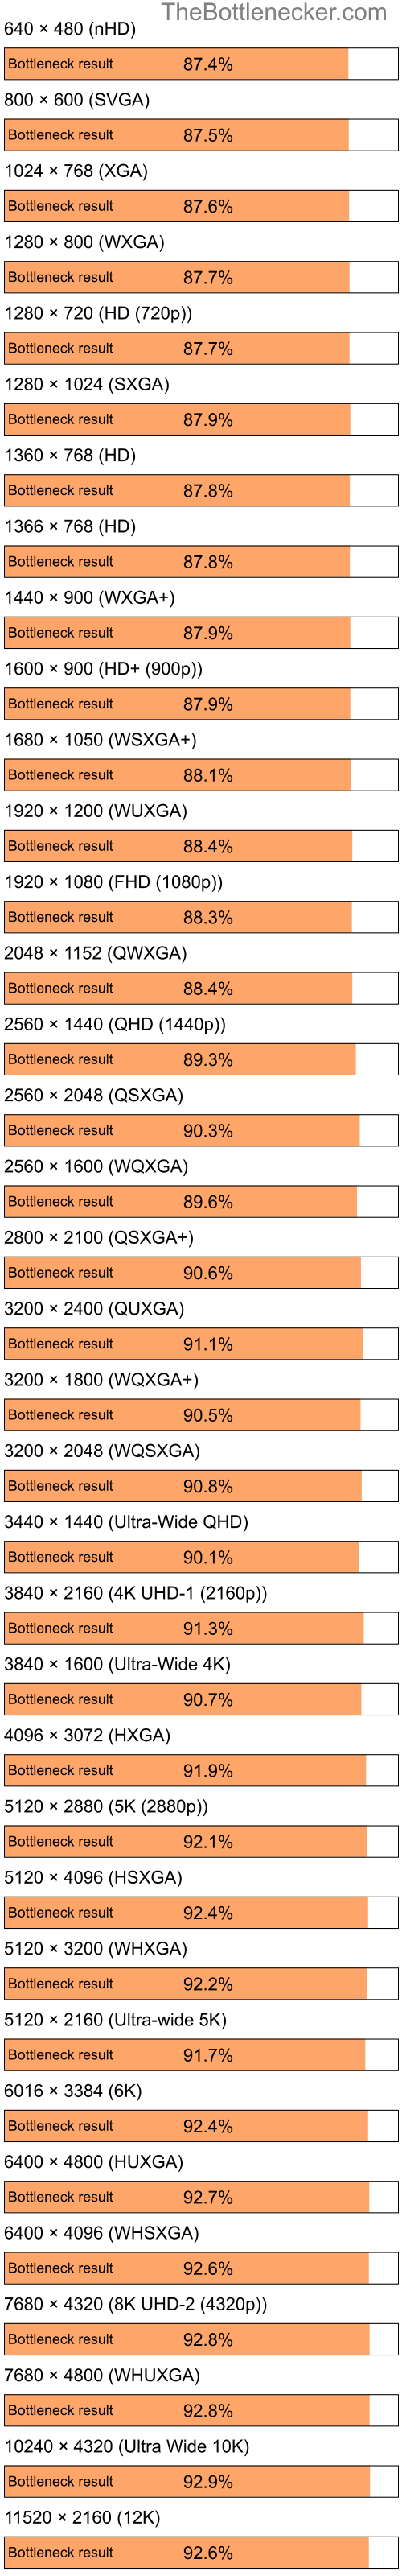 Bottleneck results by resolution for Intel Pentium 4 and NVIDIA GeForce4 MX 4000 in Processor Intense Tasks